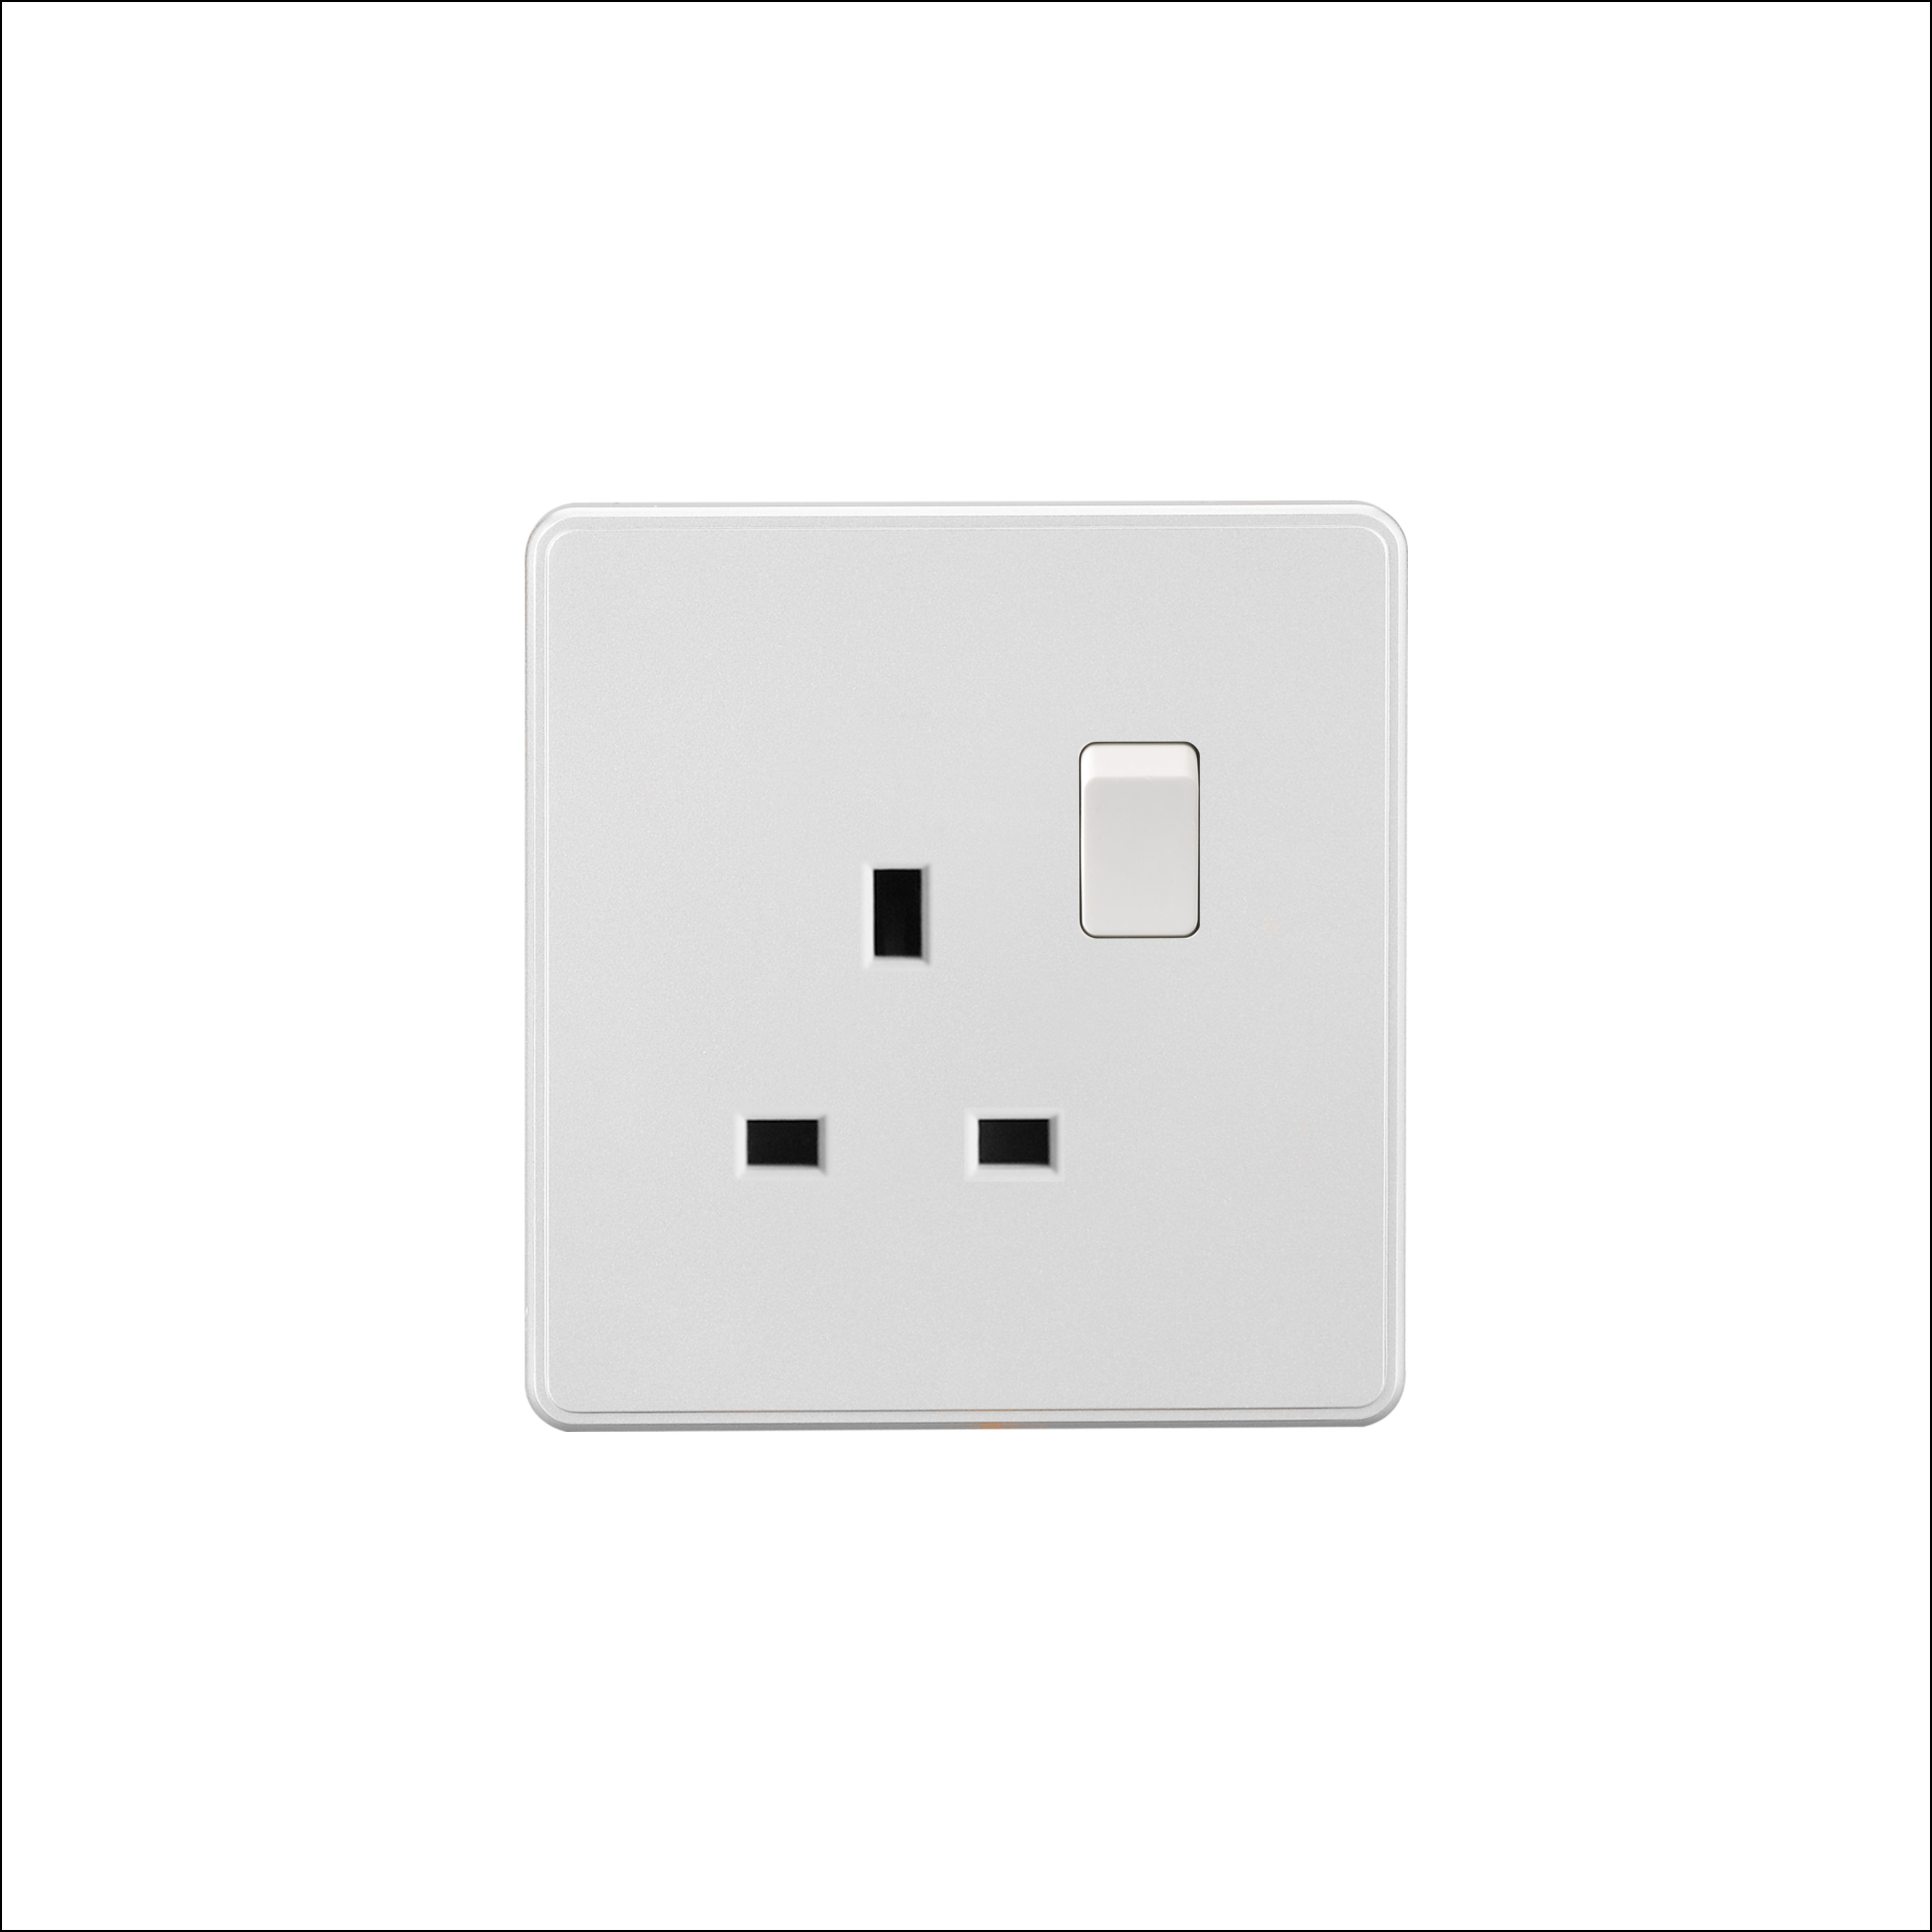 13A socket with switch 13A Featured Image